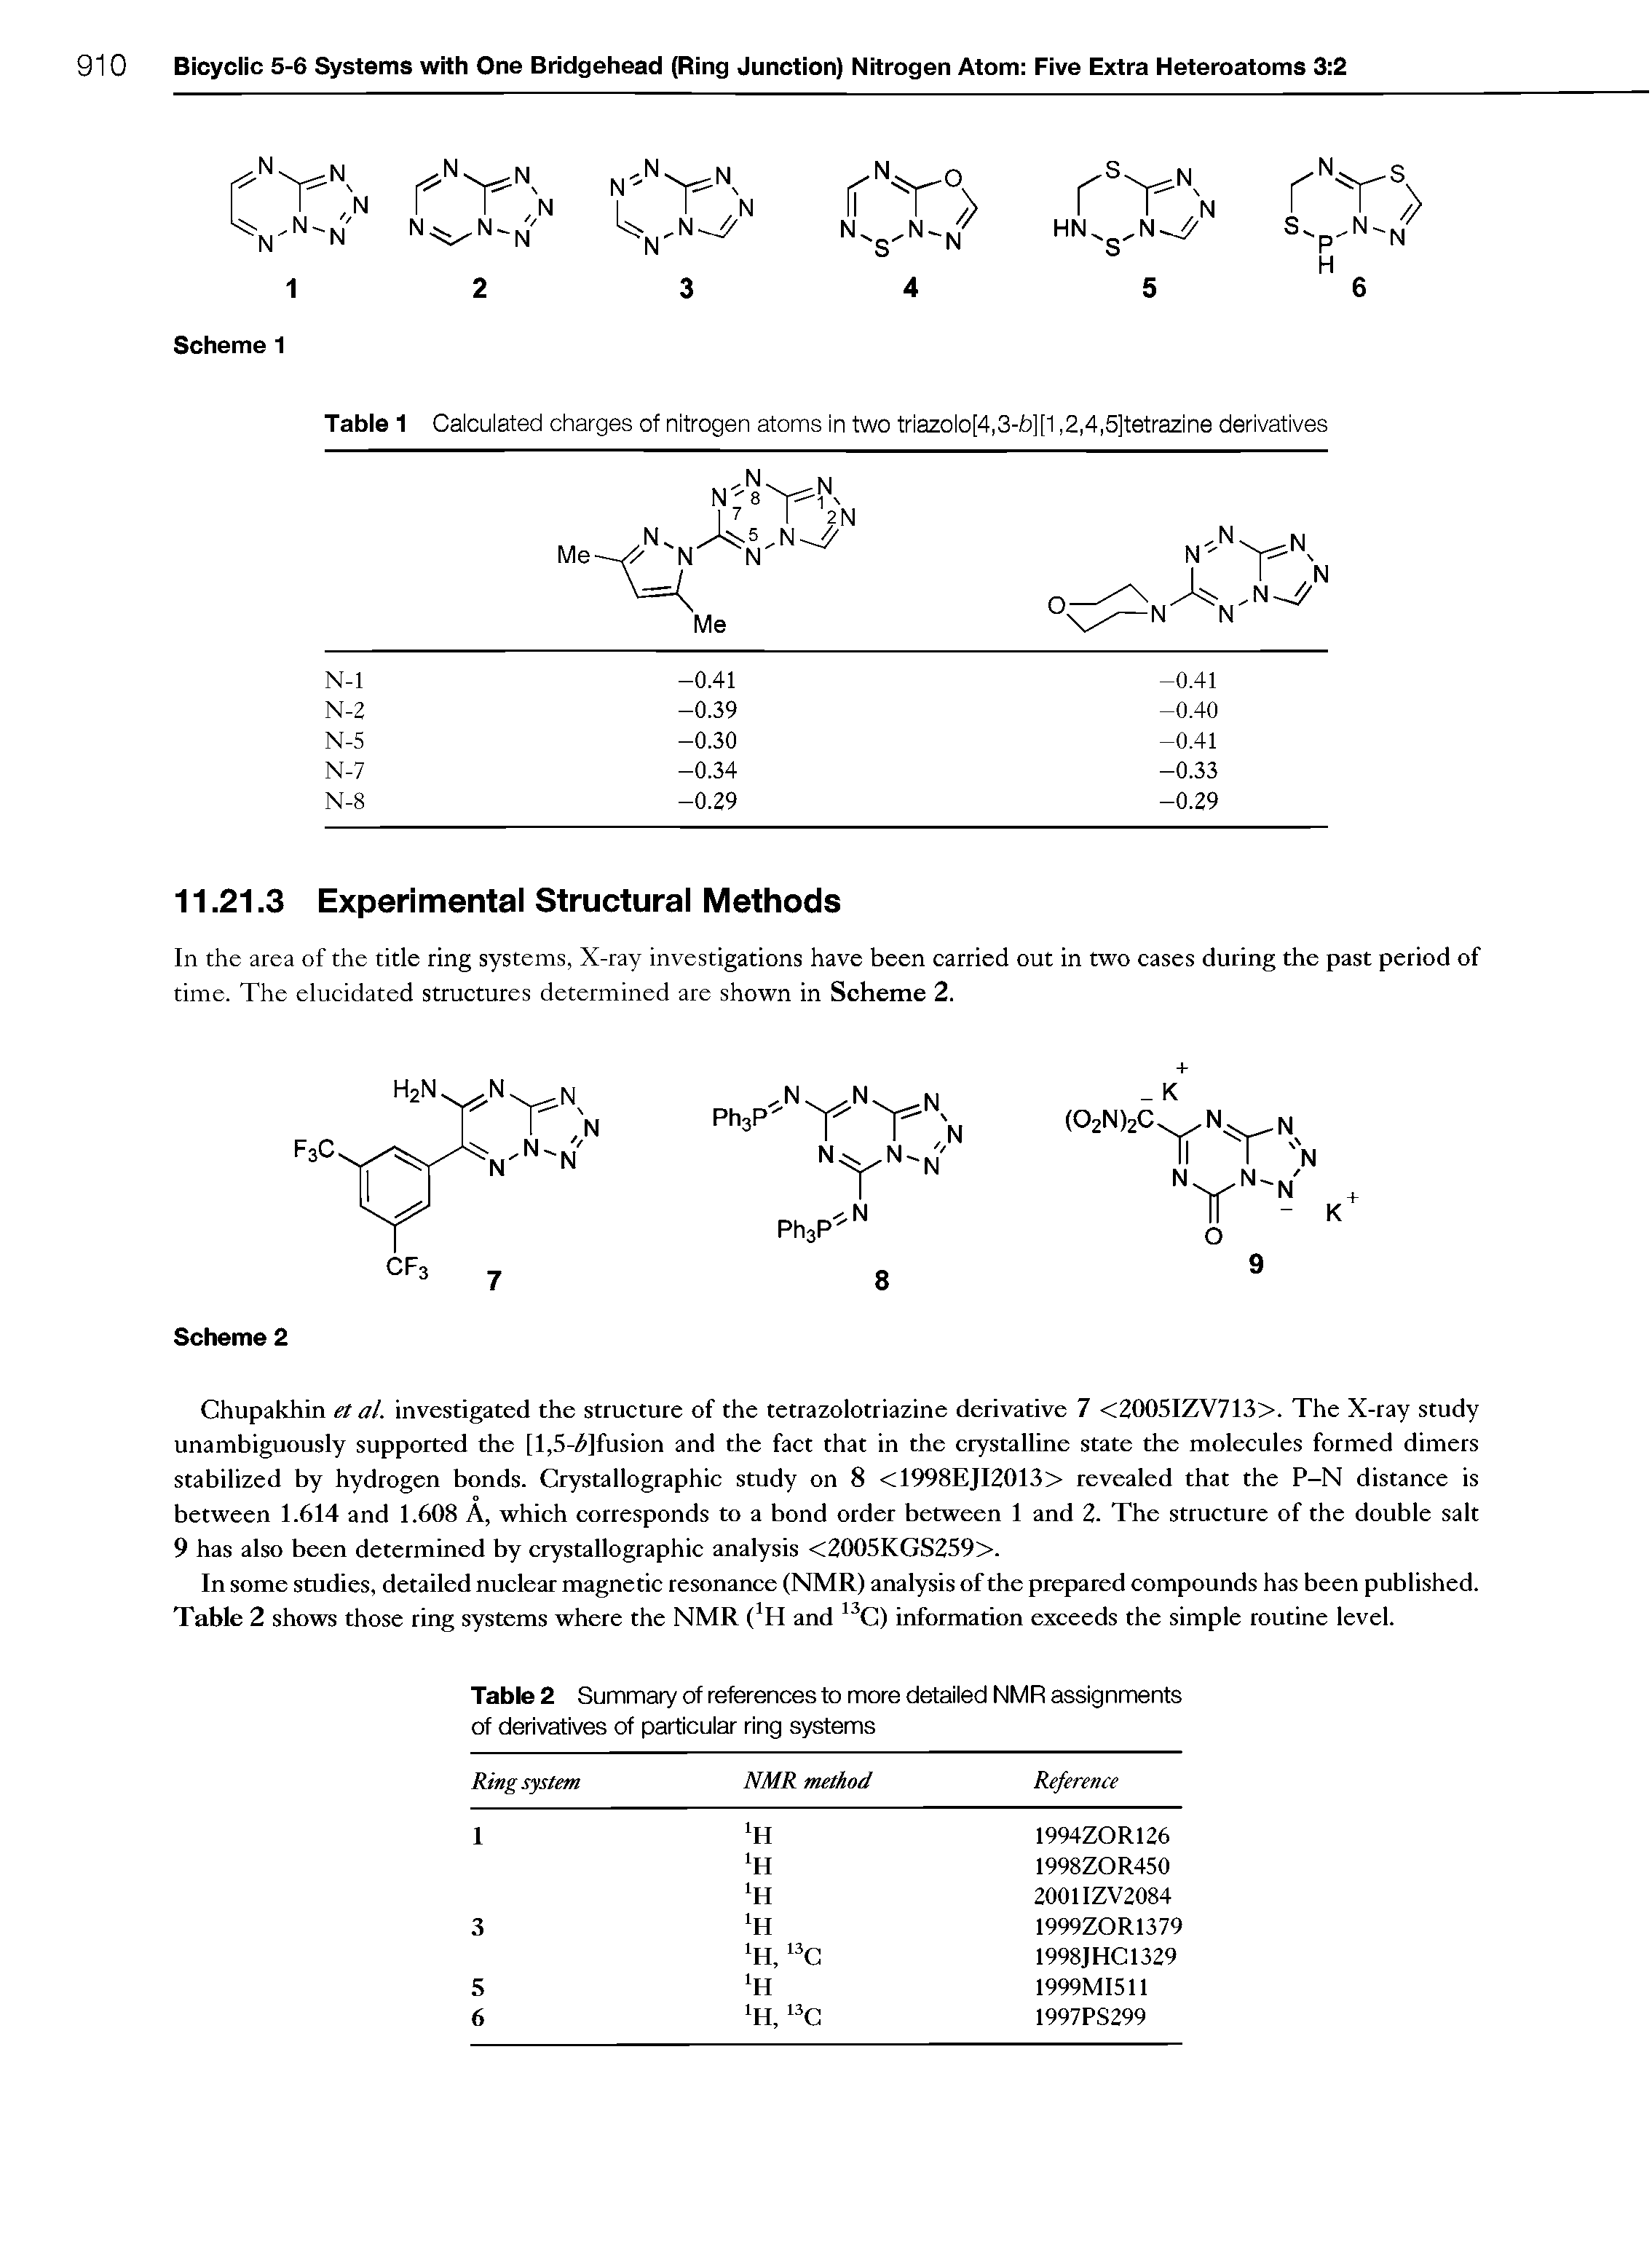 Table 1 Calculated charges of nitrogen atoms in two triazolo[4,3-fa][1,2,4,5]tetrazine derivatives...